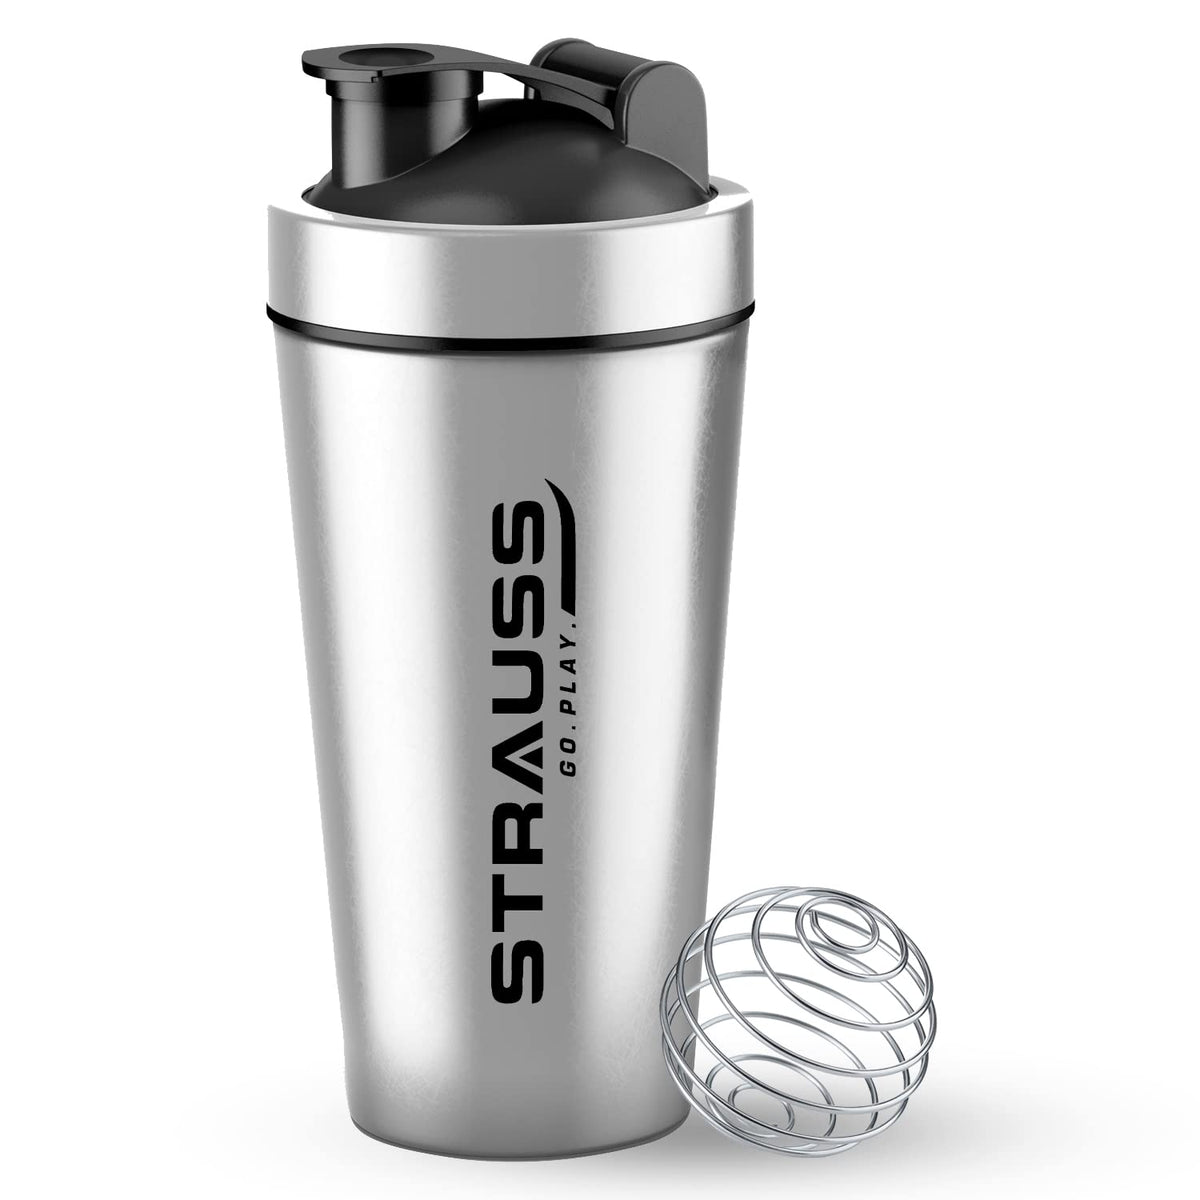 STRAUSS Stainless Steel Shaker Water Bottle, Silver (Pack of 1)